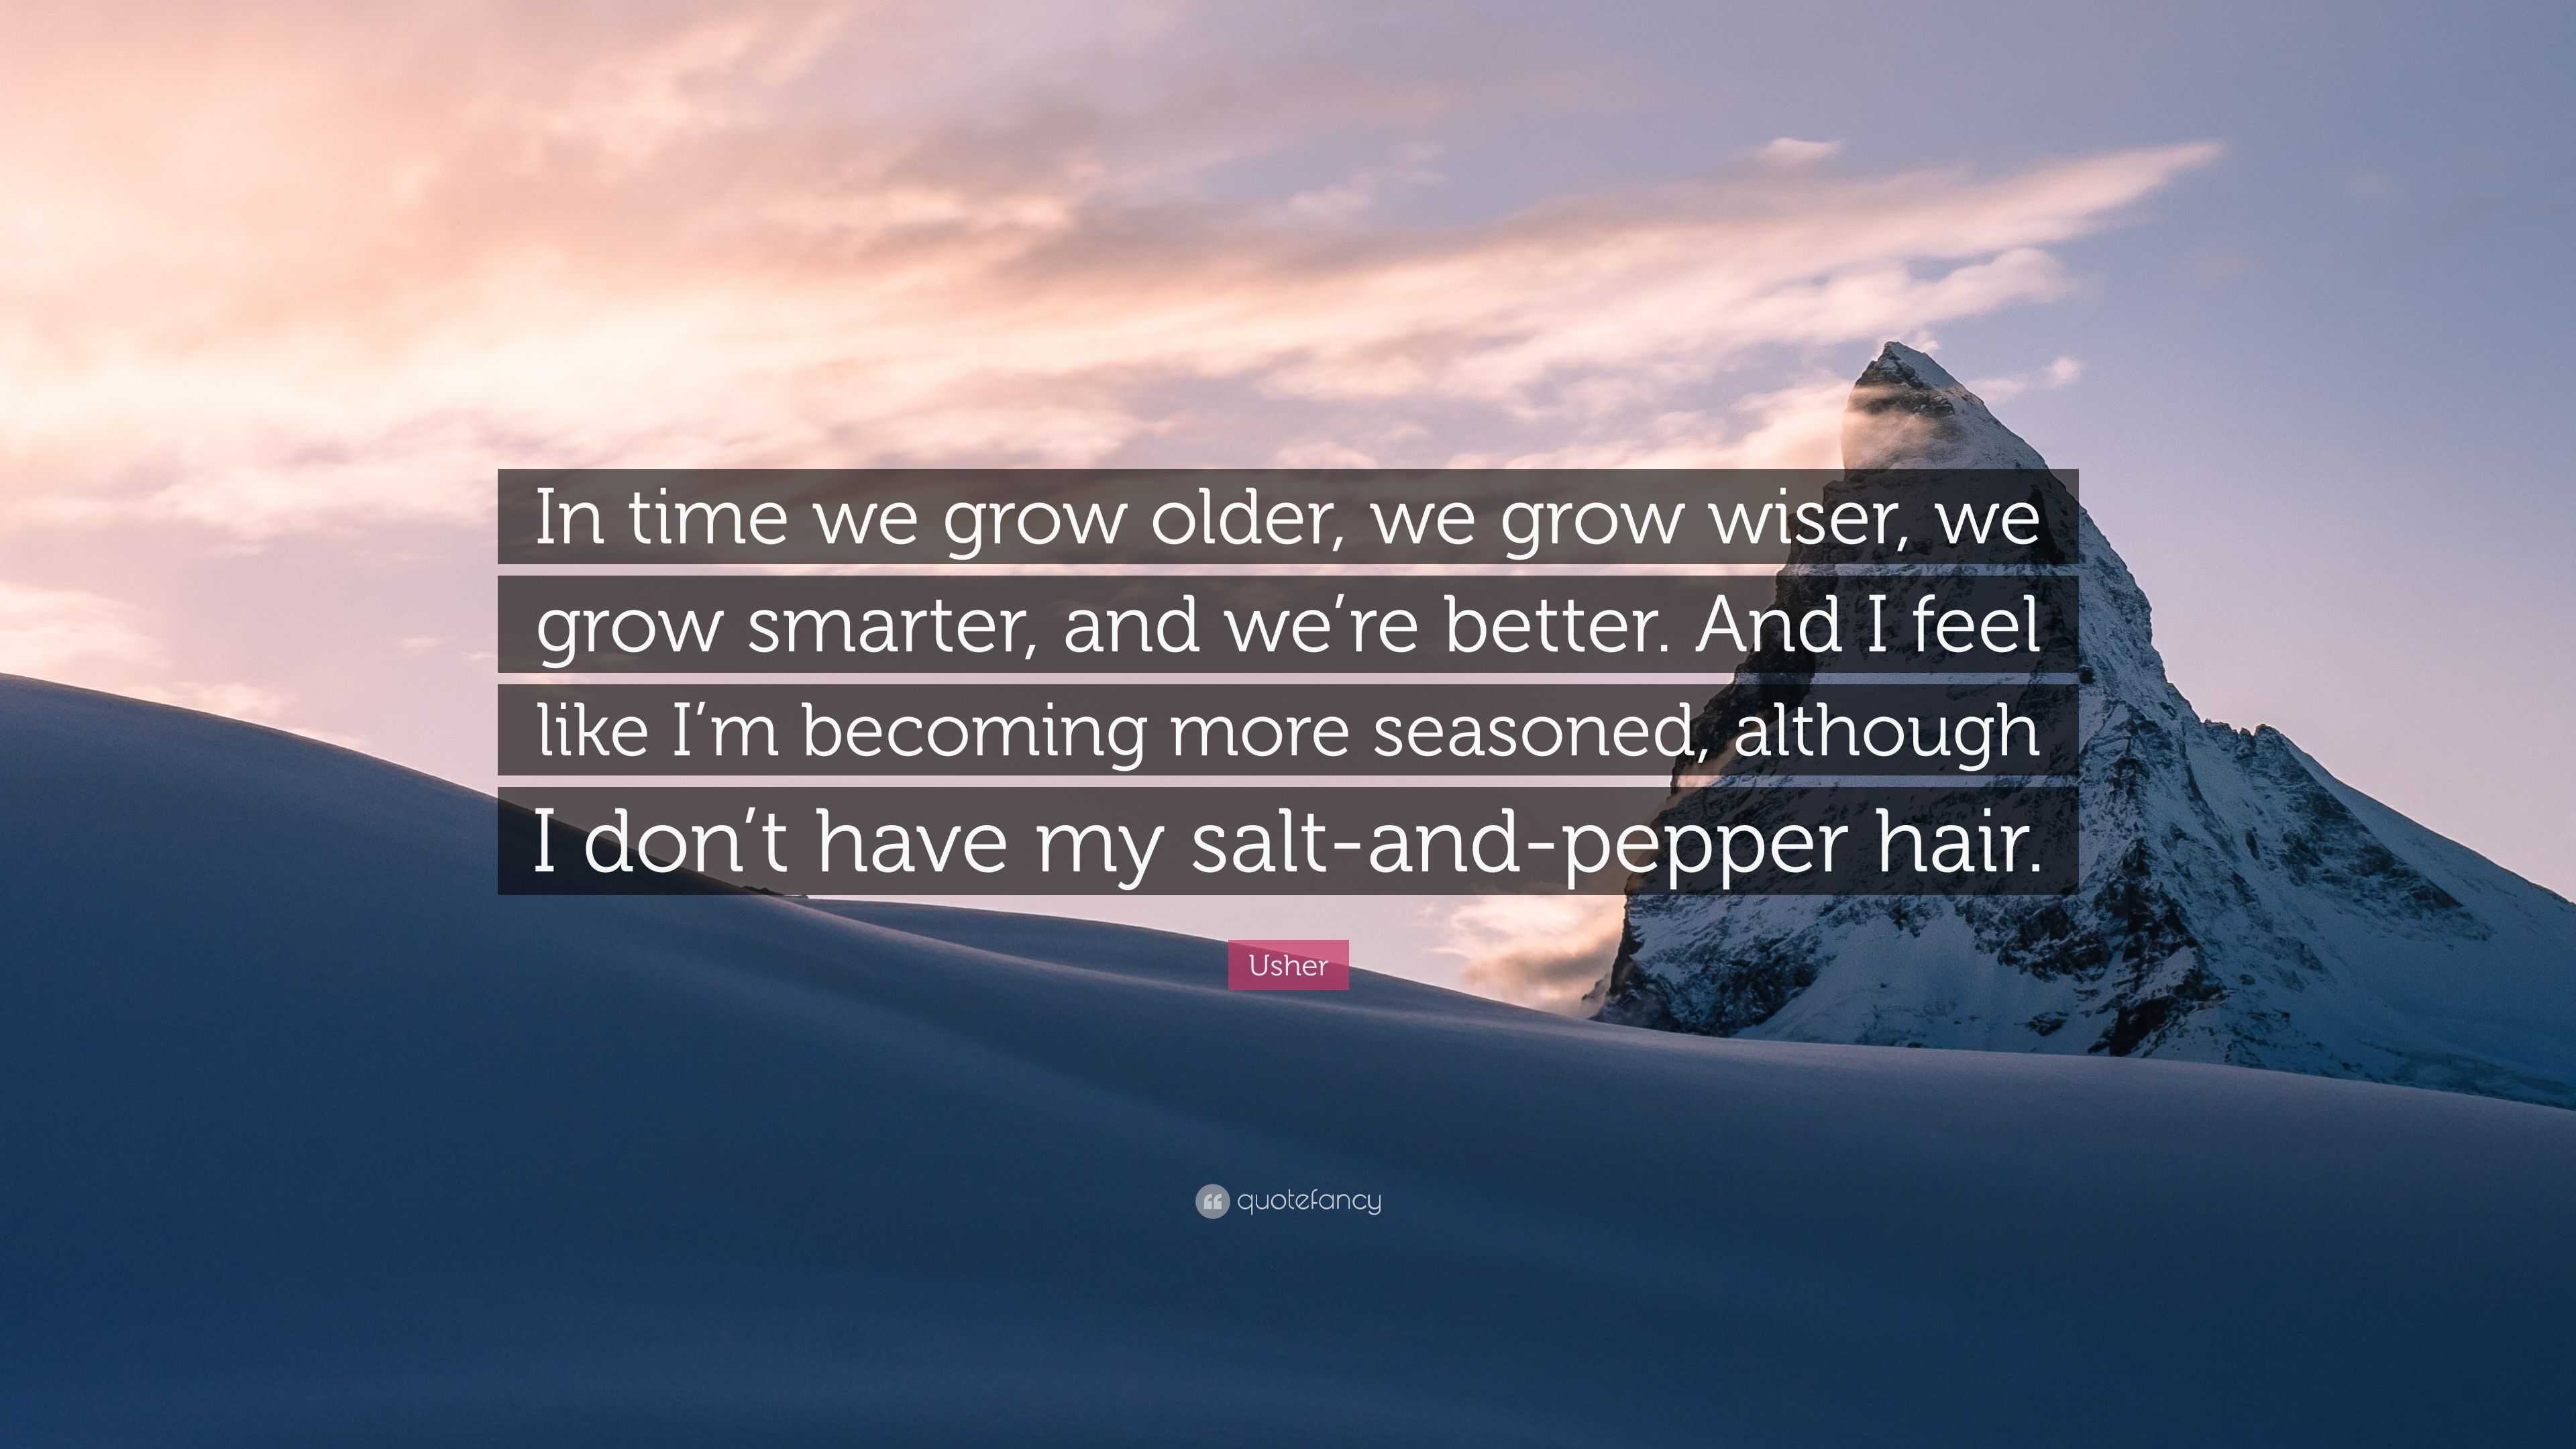 Usher Quote: “In time we grow older, we grow wiser, we grow smarter, and  we're better. And I feel like I'm becoming more seasoned, alt...”